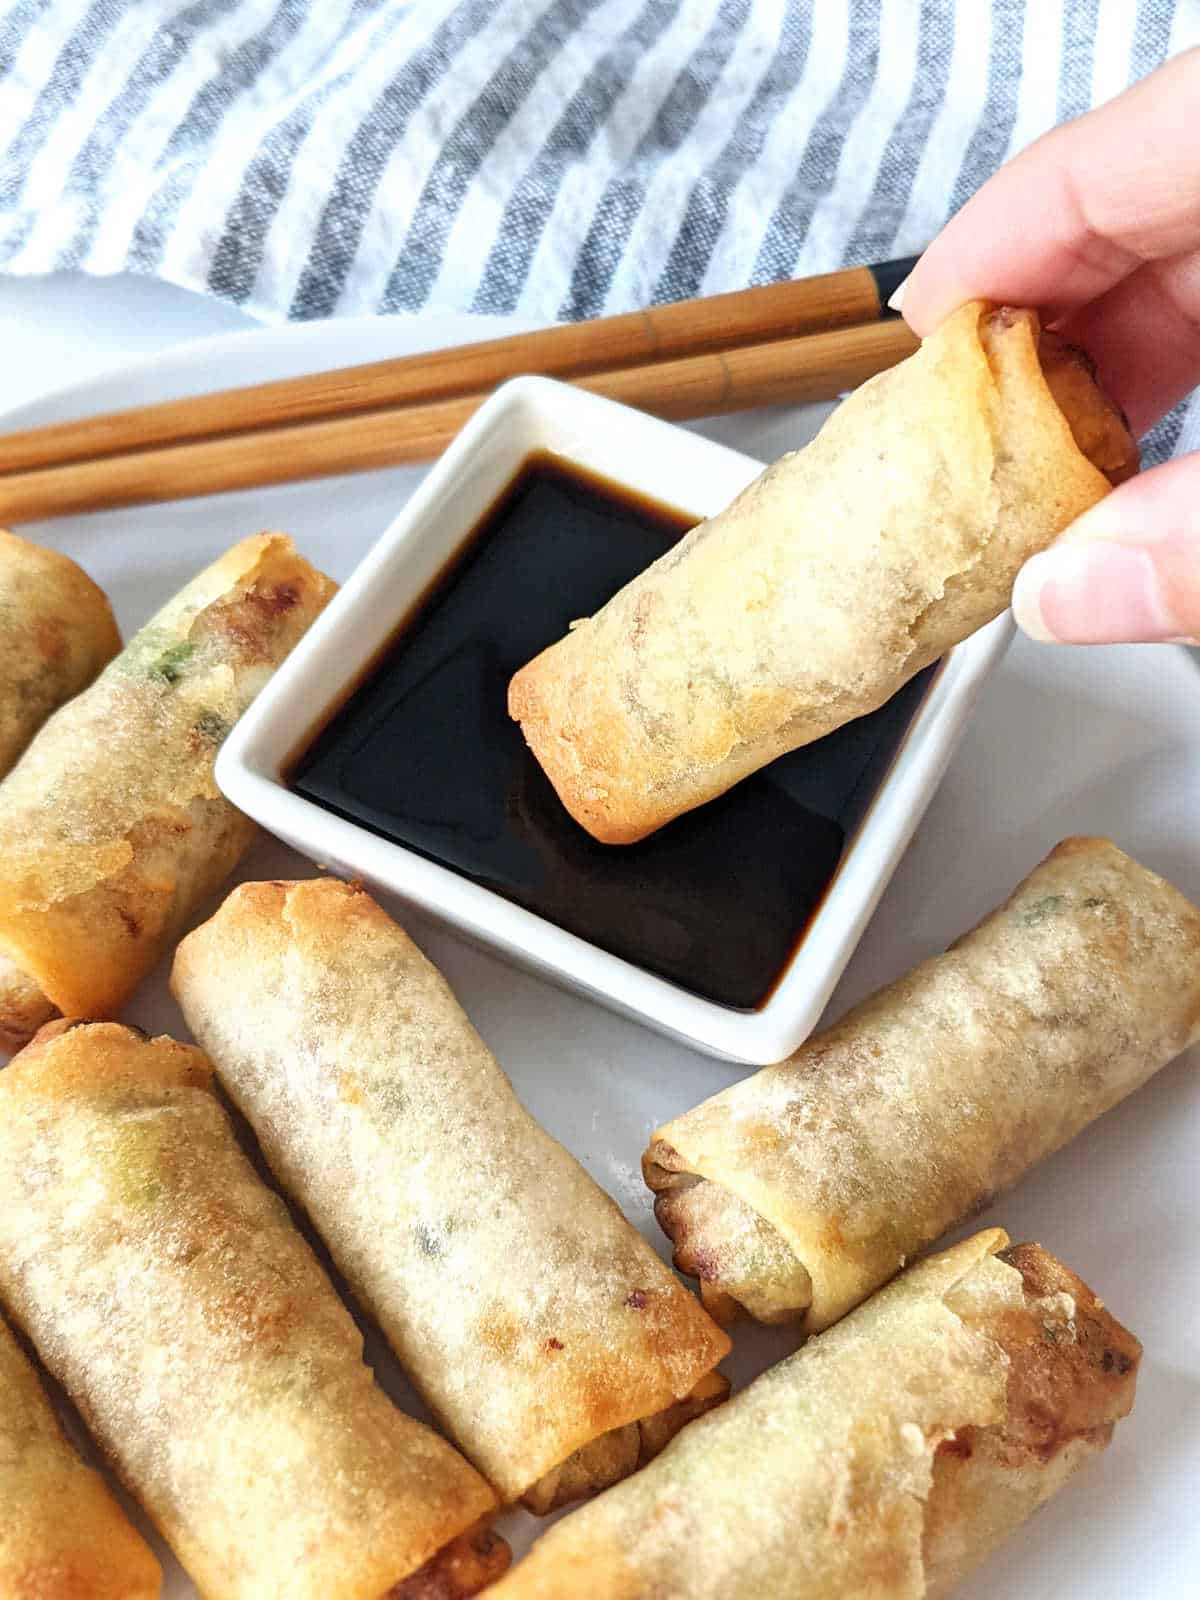 Hand holding a spring roll and dipping it into some soy sauce.